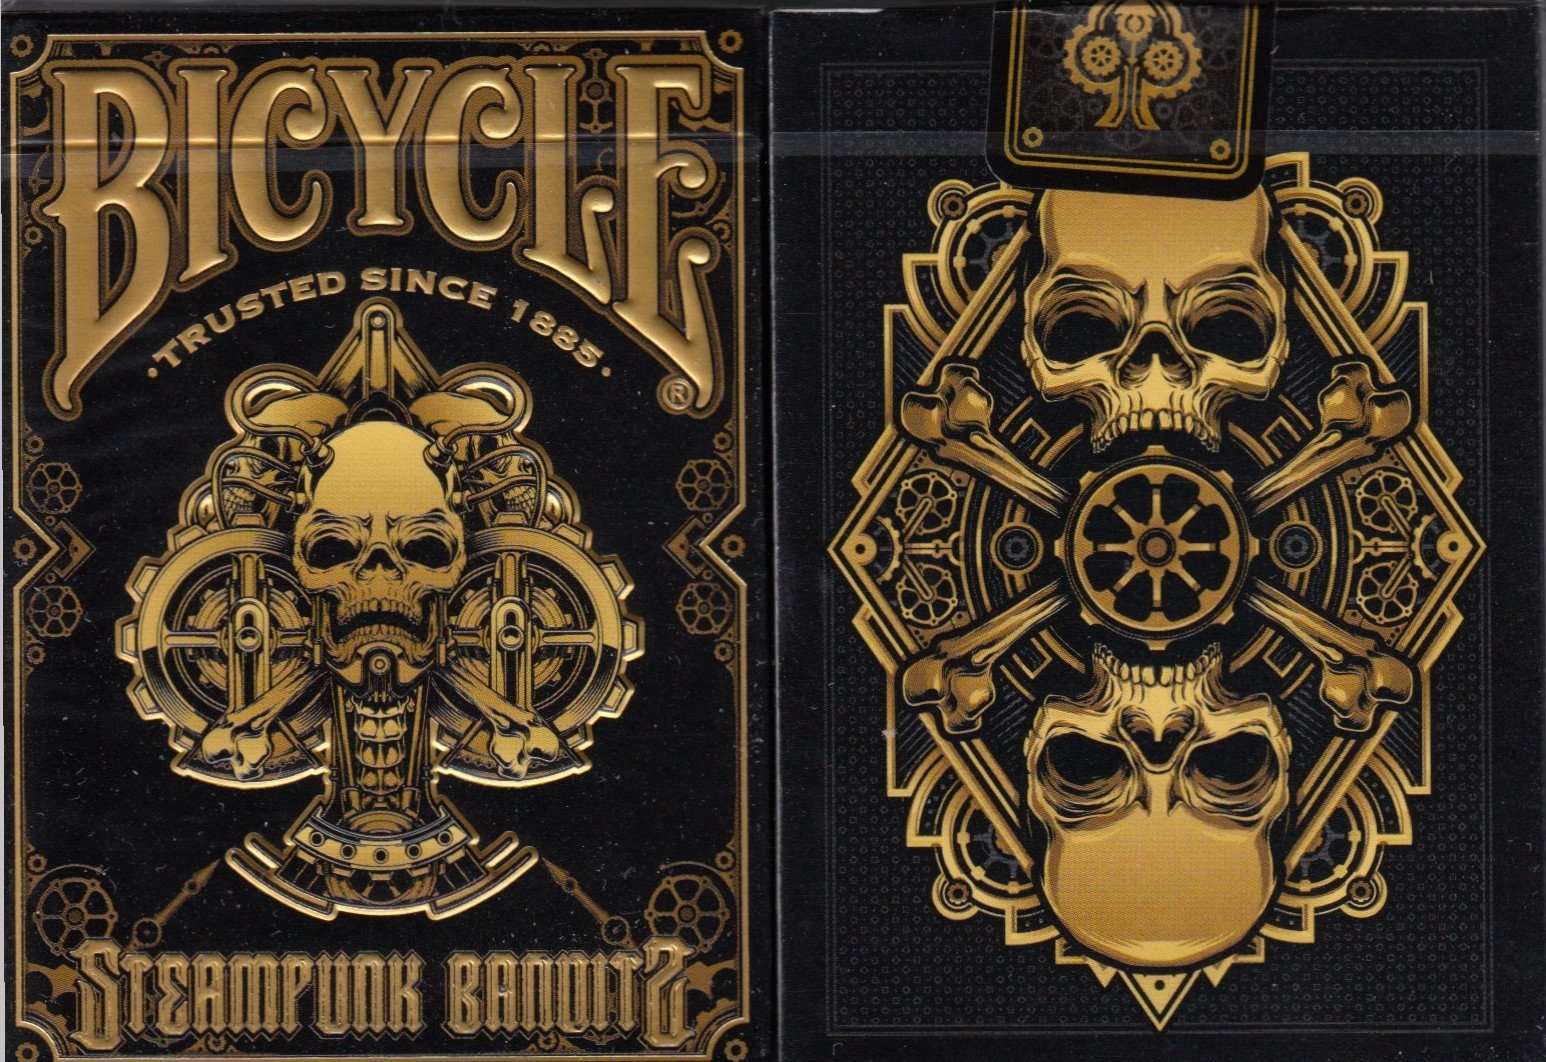 Steampunk Bandits Bicycle Playing Cards - Black & White